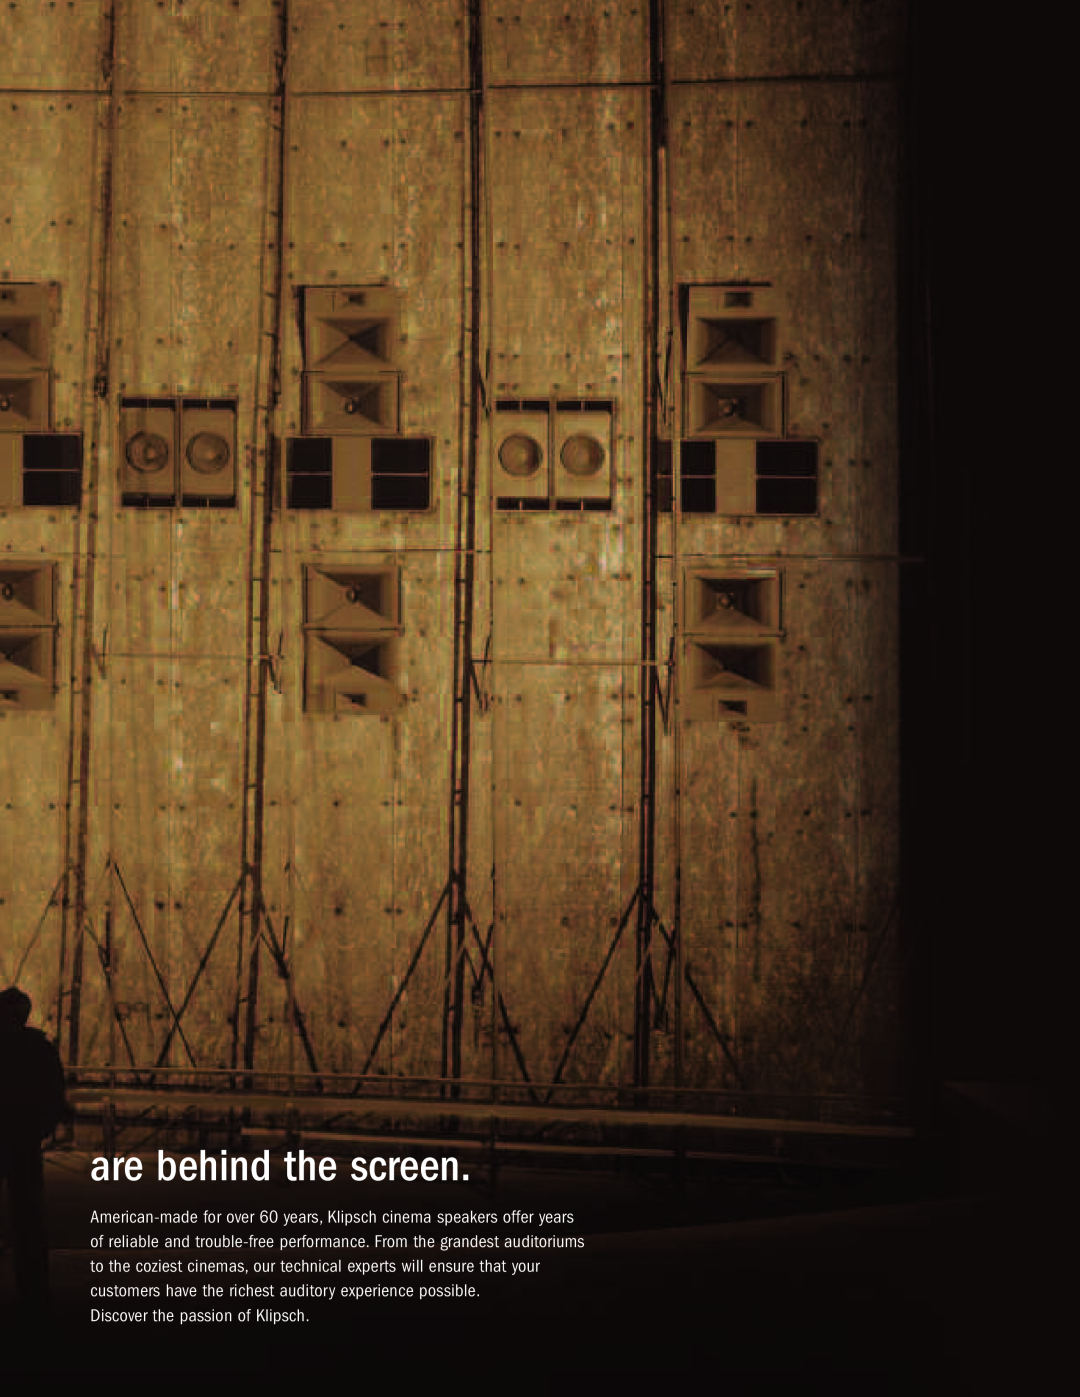 Klipsch Loudspeaker System manual are behind the screen, Discover the passion of Klipsch 